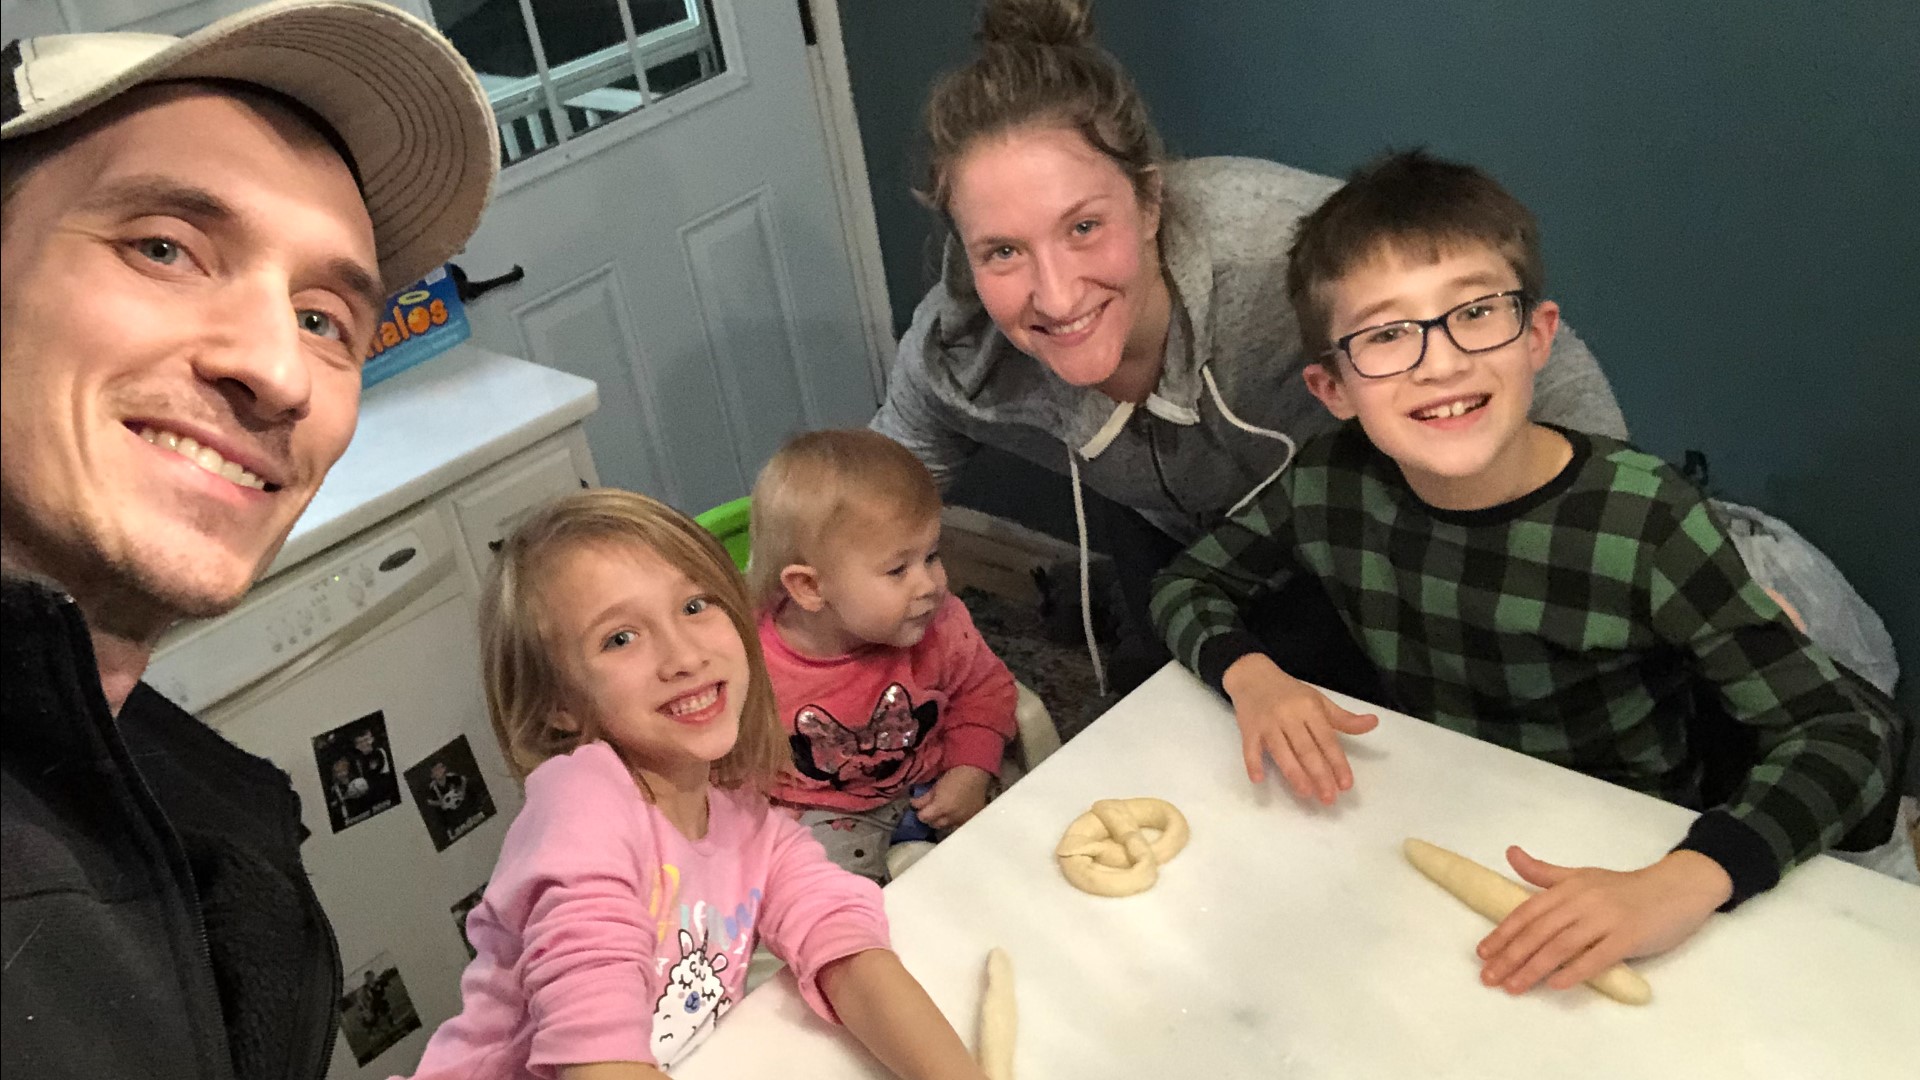 While none of the Parsell family got physically sick, the Upper Sandusky parents say the pandemic affected the family's mental health. Here's how they are coping.